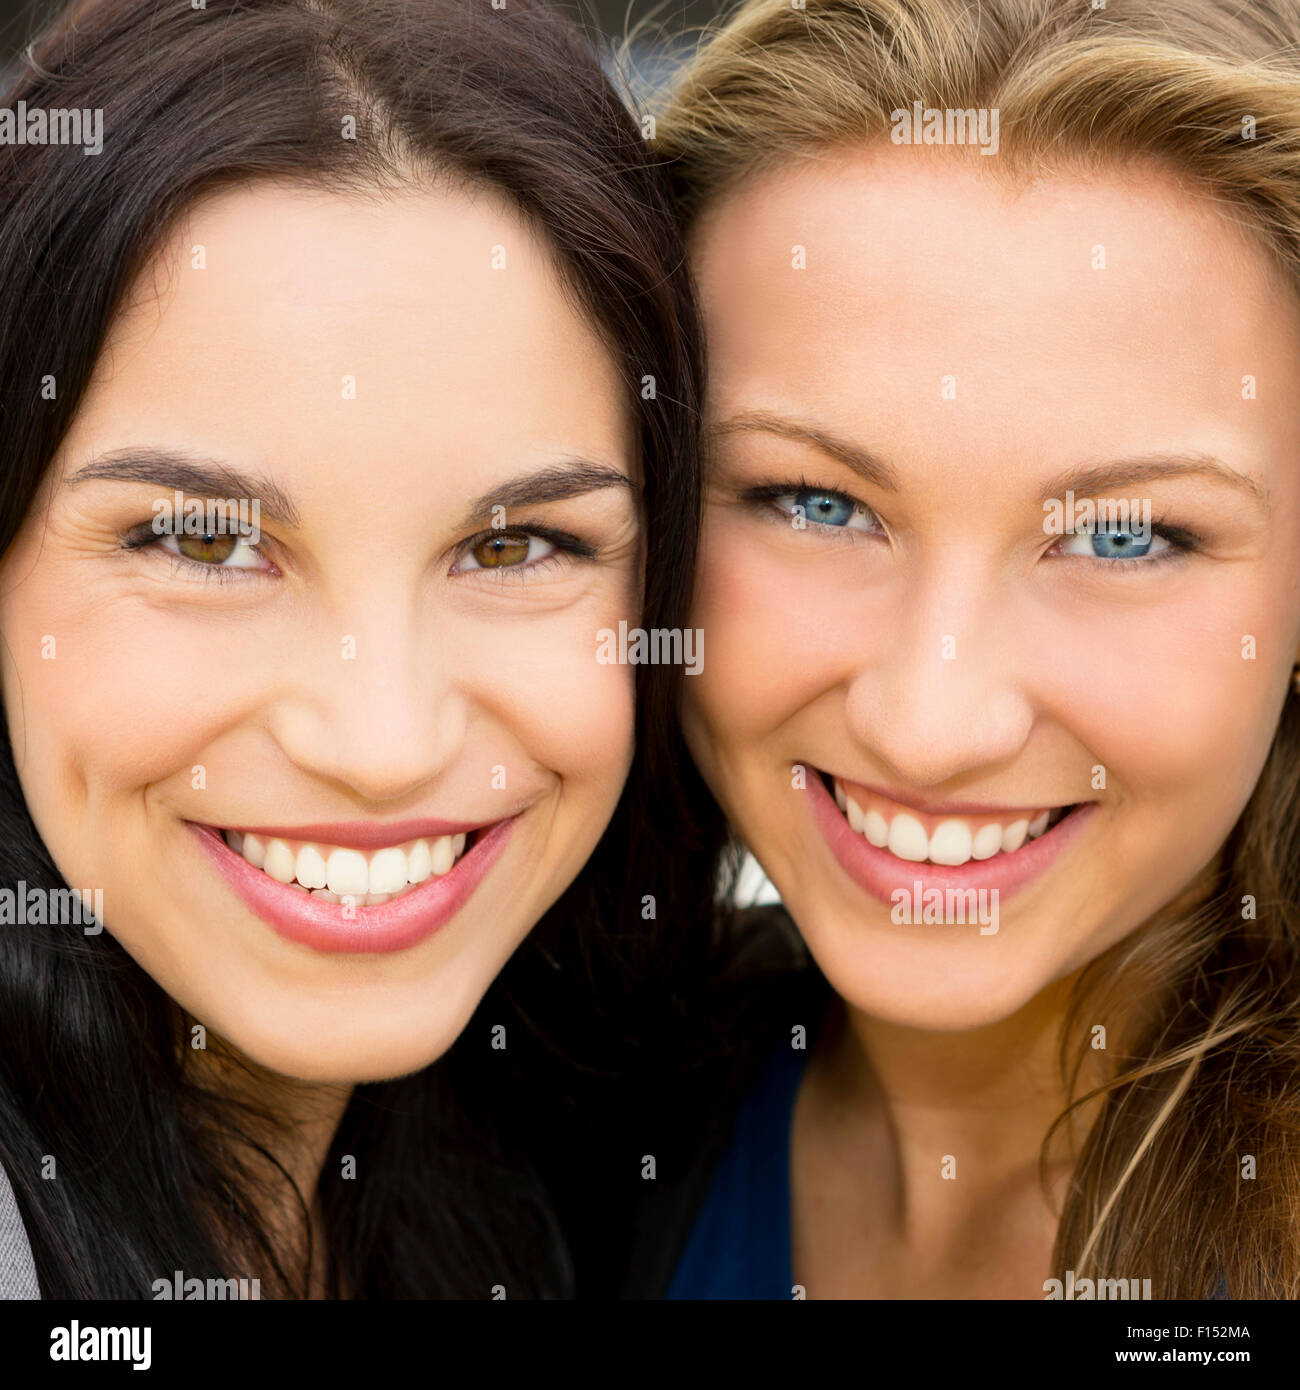 Portrait of a beautiful two young girls smiling Stock Photo